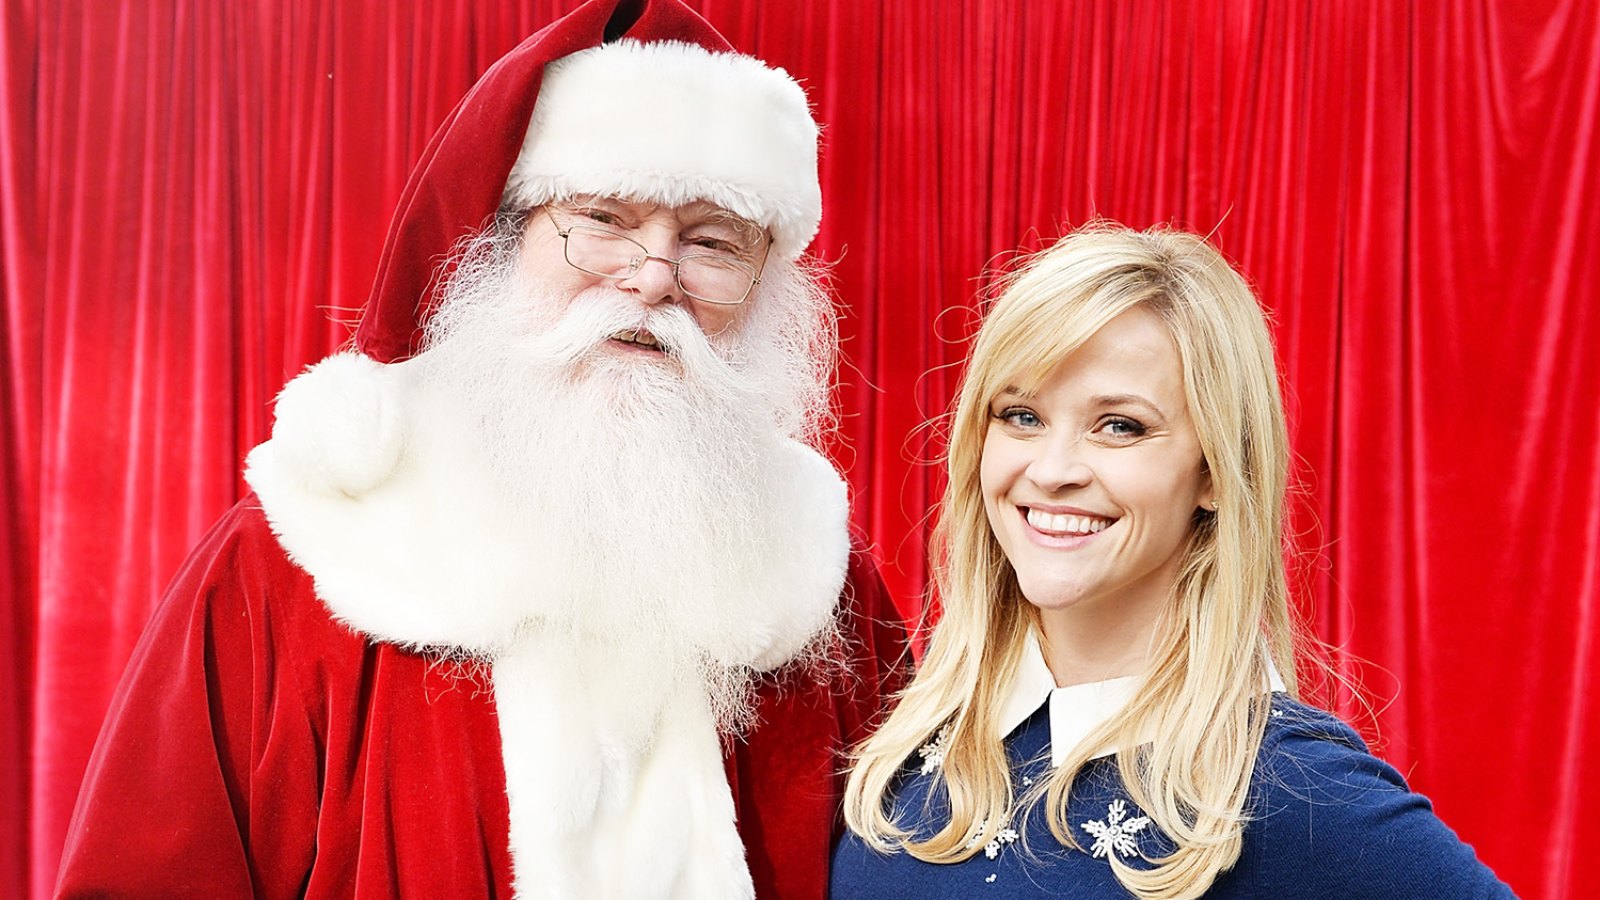 Santa Claus and Reese Witherspoon at The Grove in L.A.